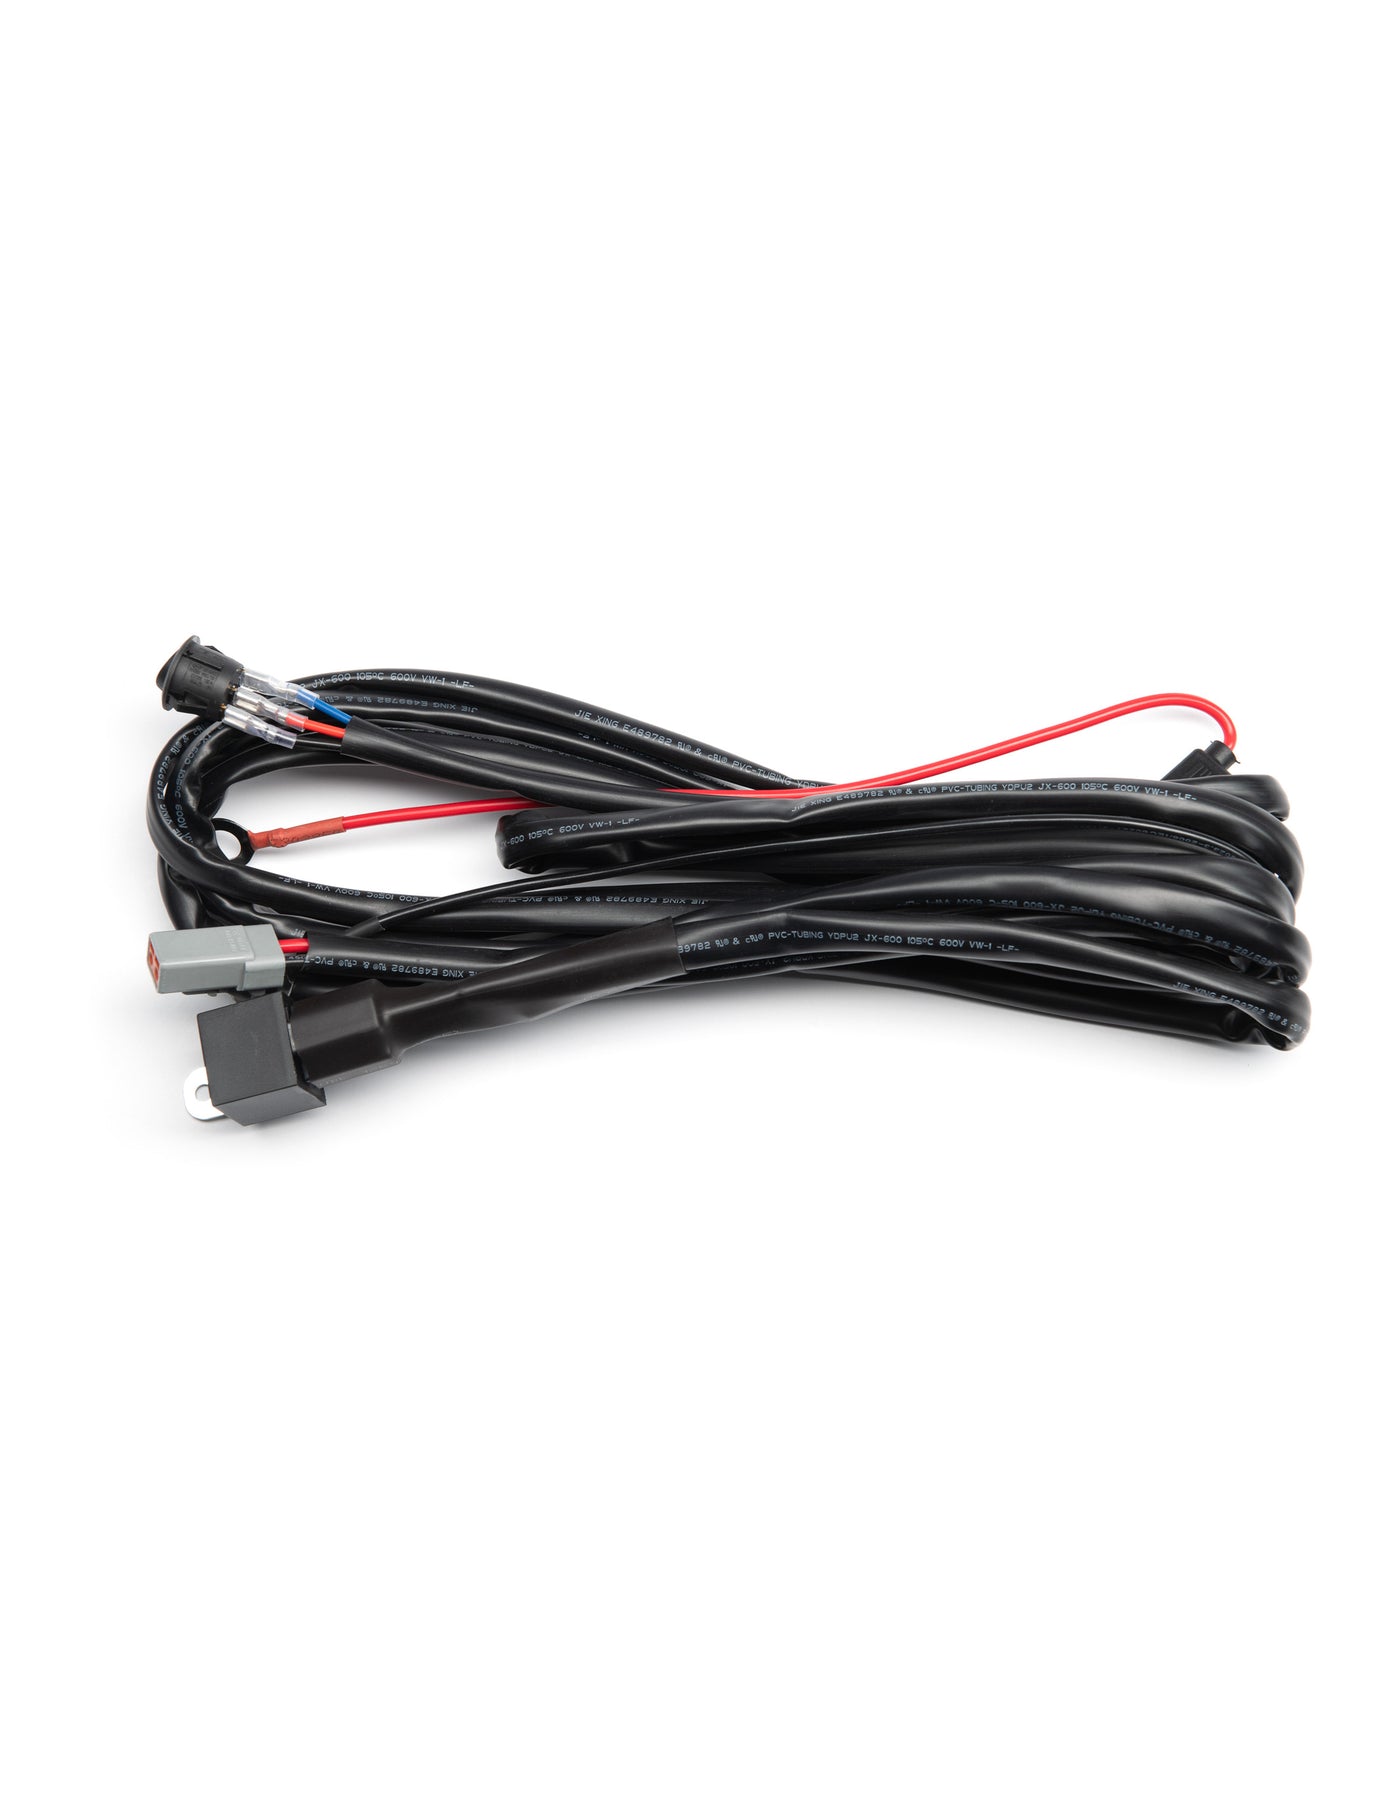 30", 40", or 50" light bar Deutch connector wiring harness with switch - North Lights